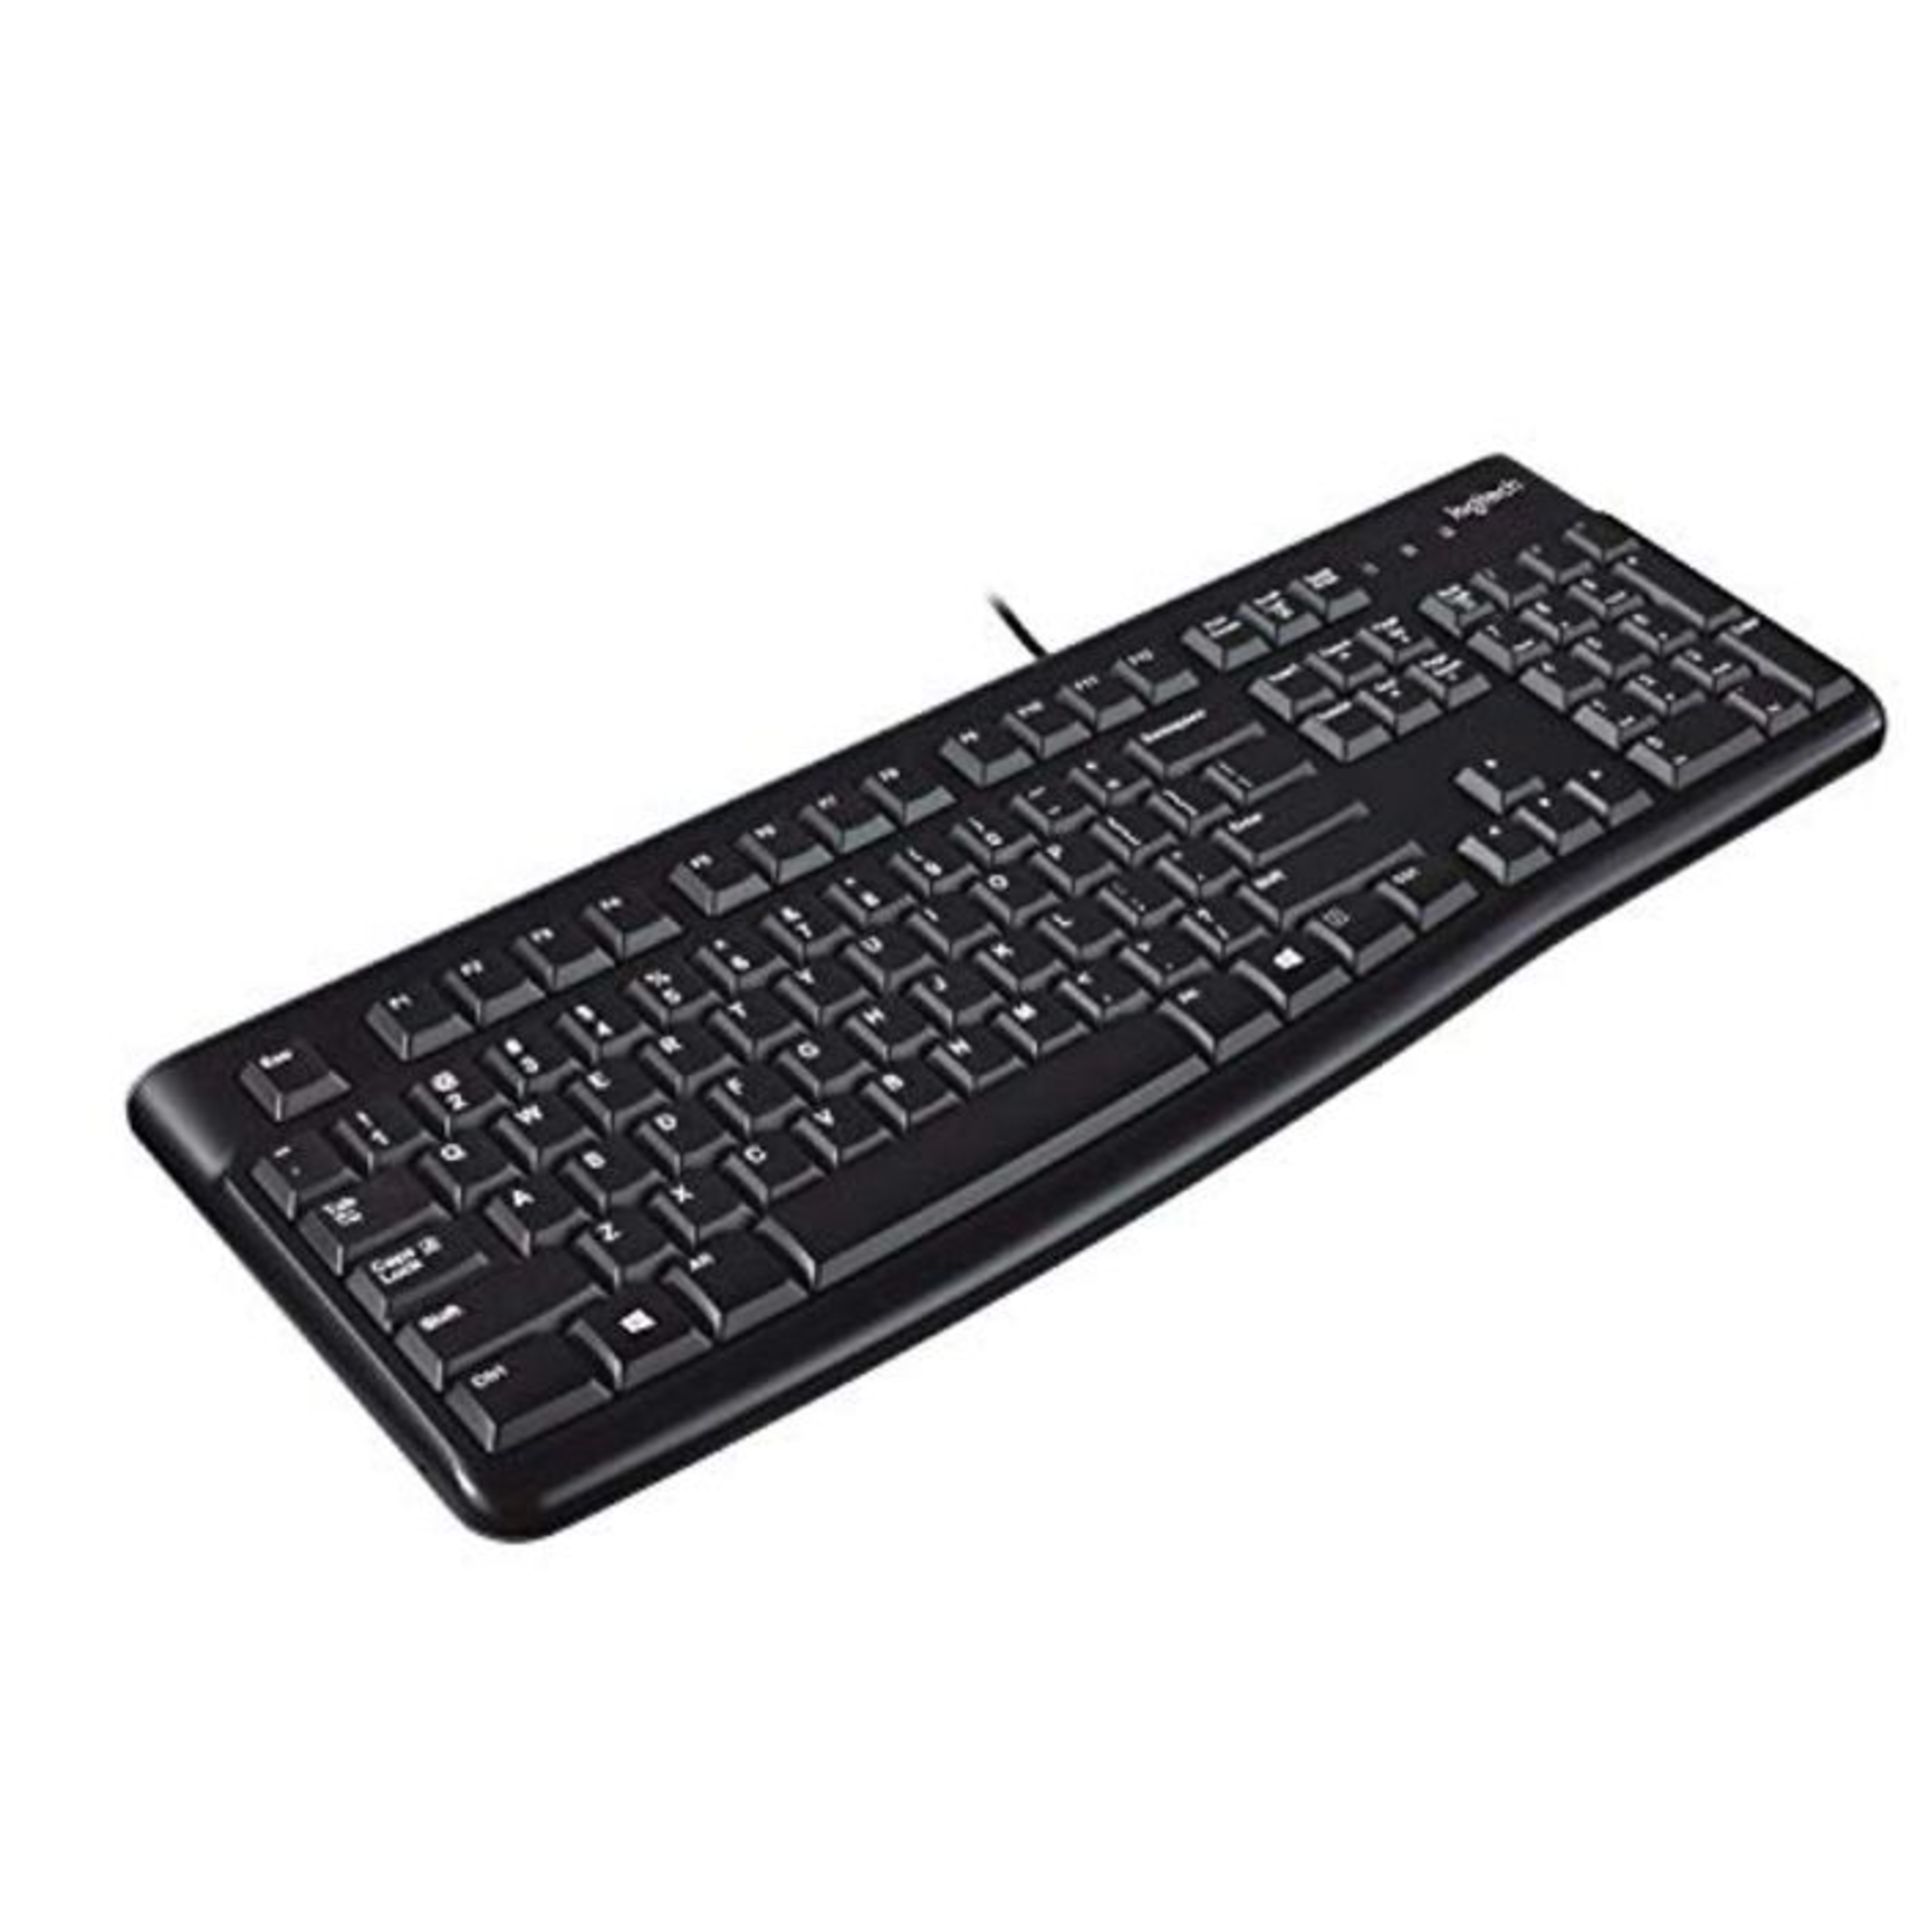 Logitech K120 Wired Business Keyboard for Windows or Linux, USB Plug-and-Play, Full-Si